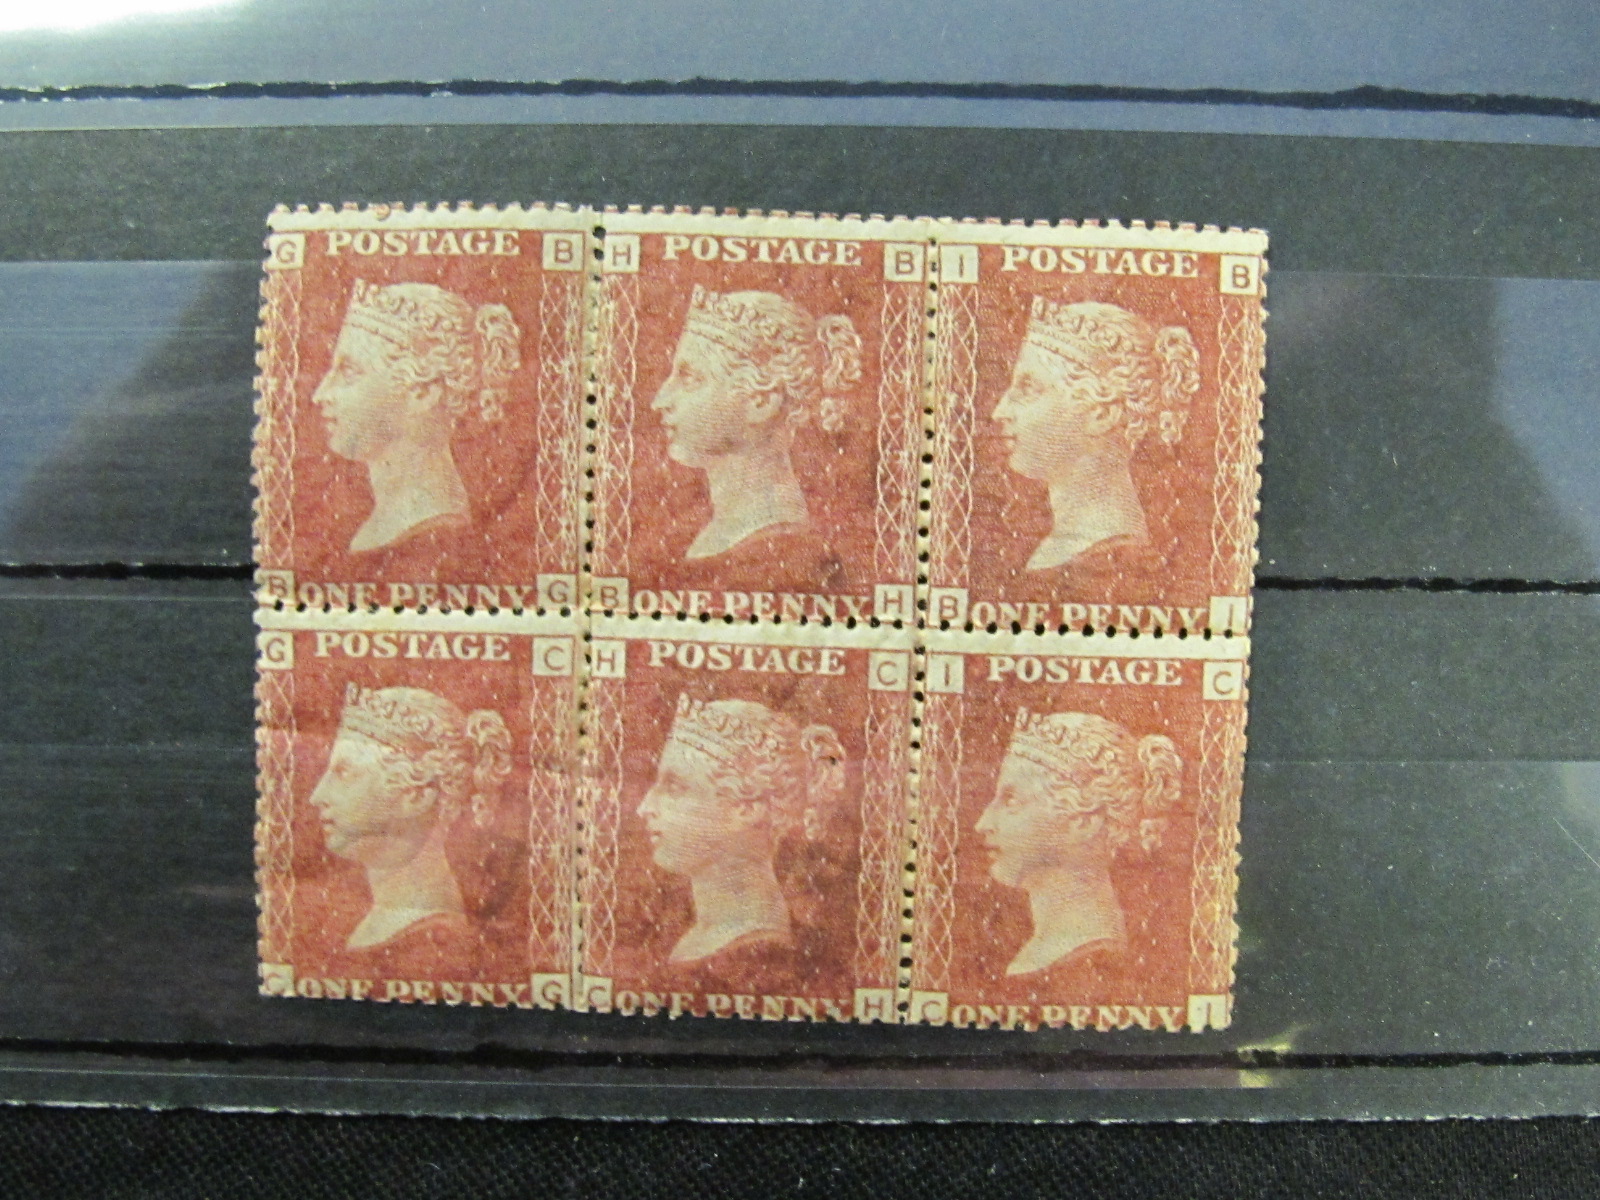 GB - QV Penny Red block of six, plate 212, top middle stamp MM, rest UM, bottom middle small pin